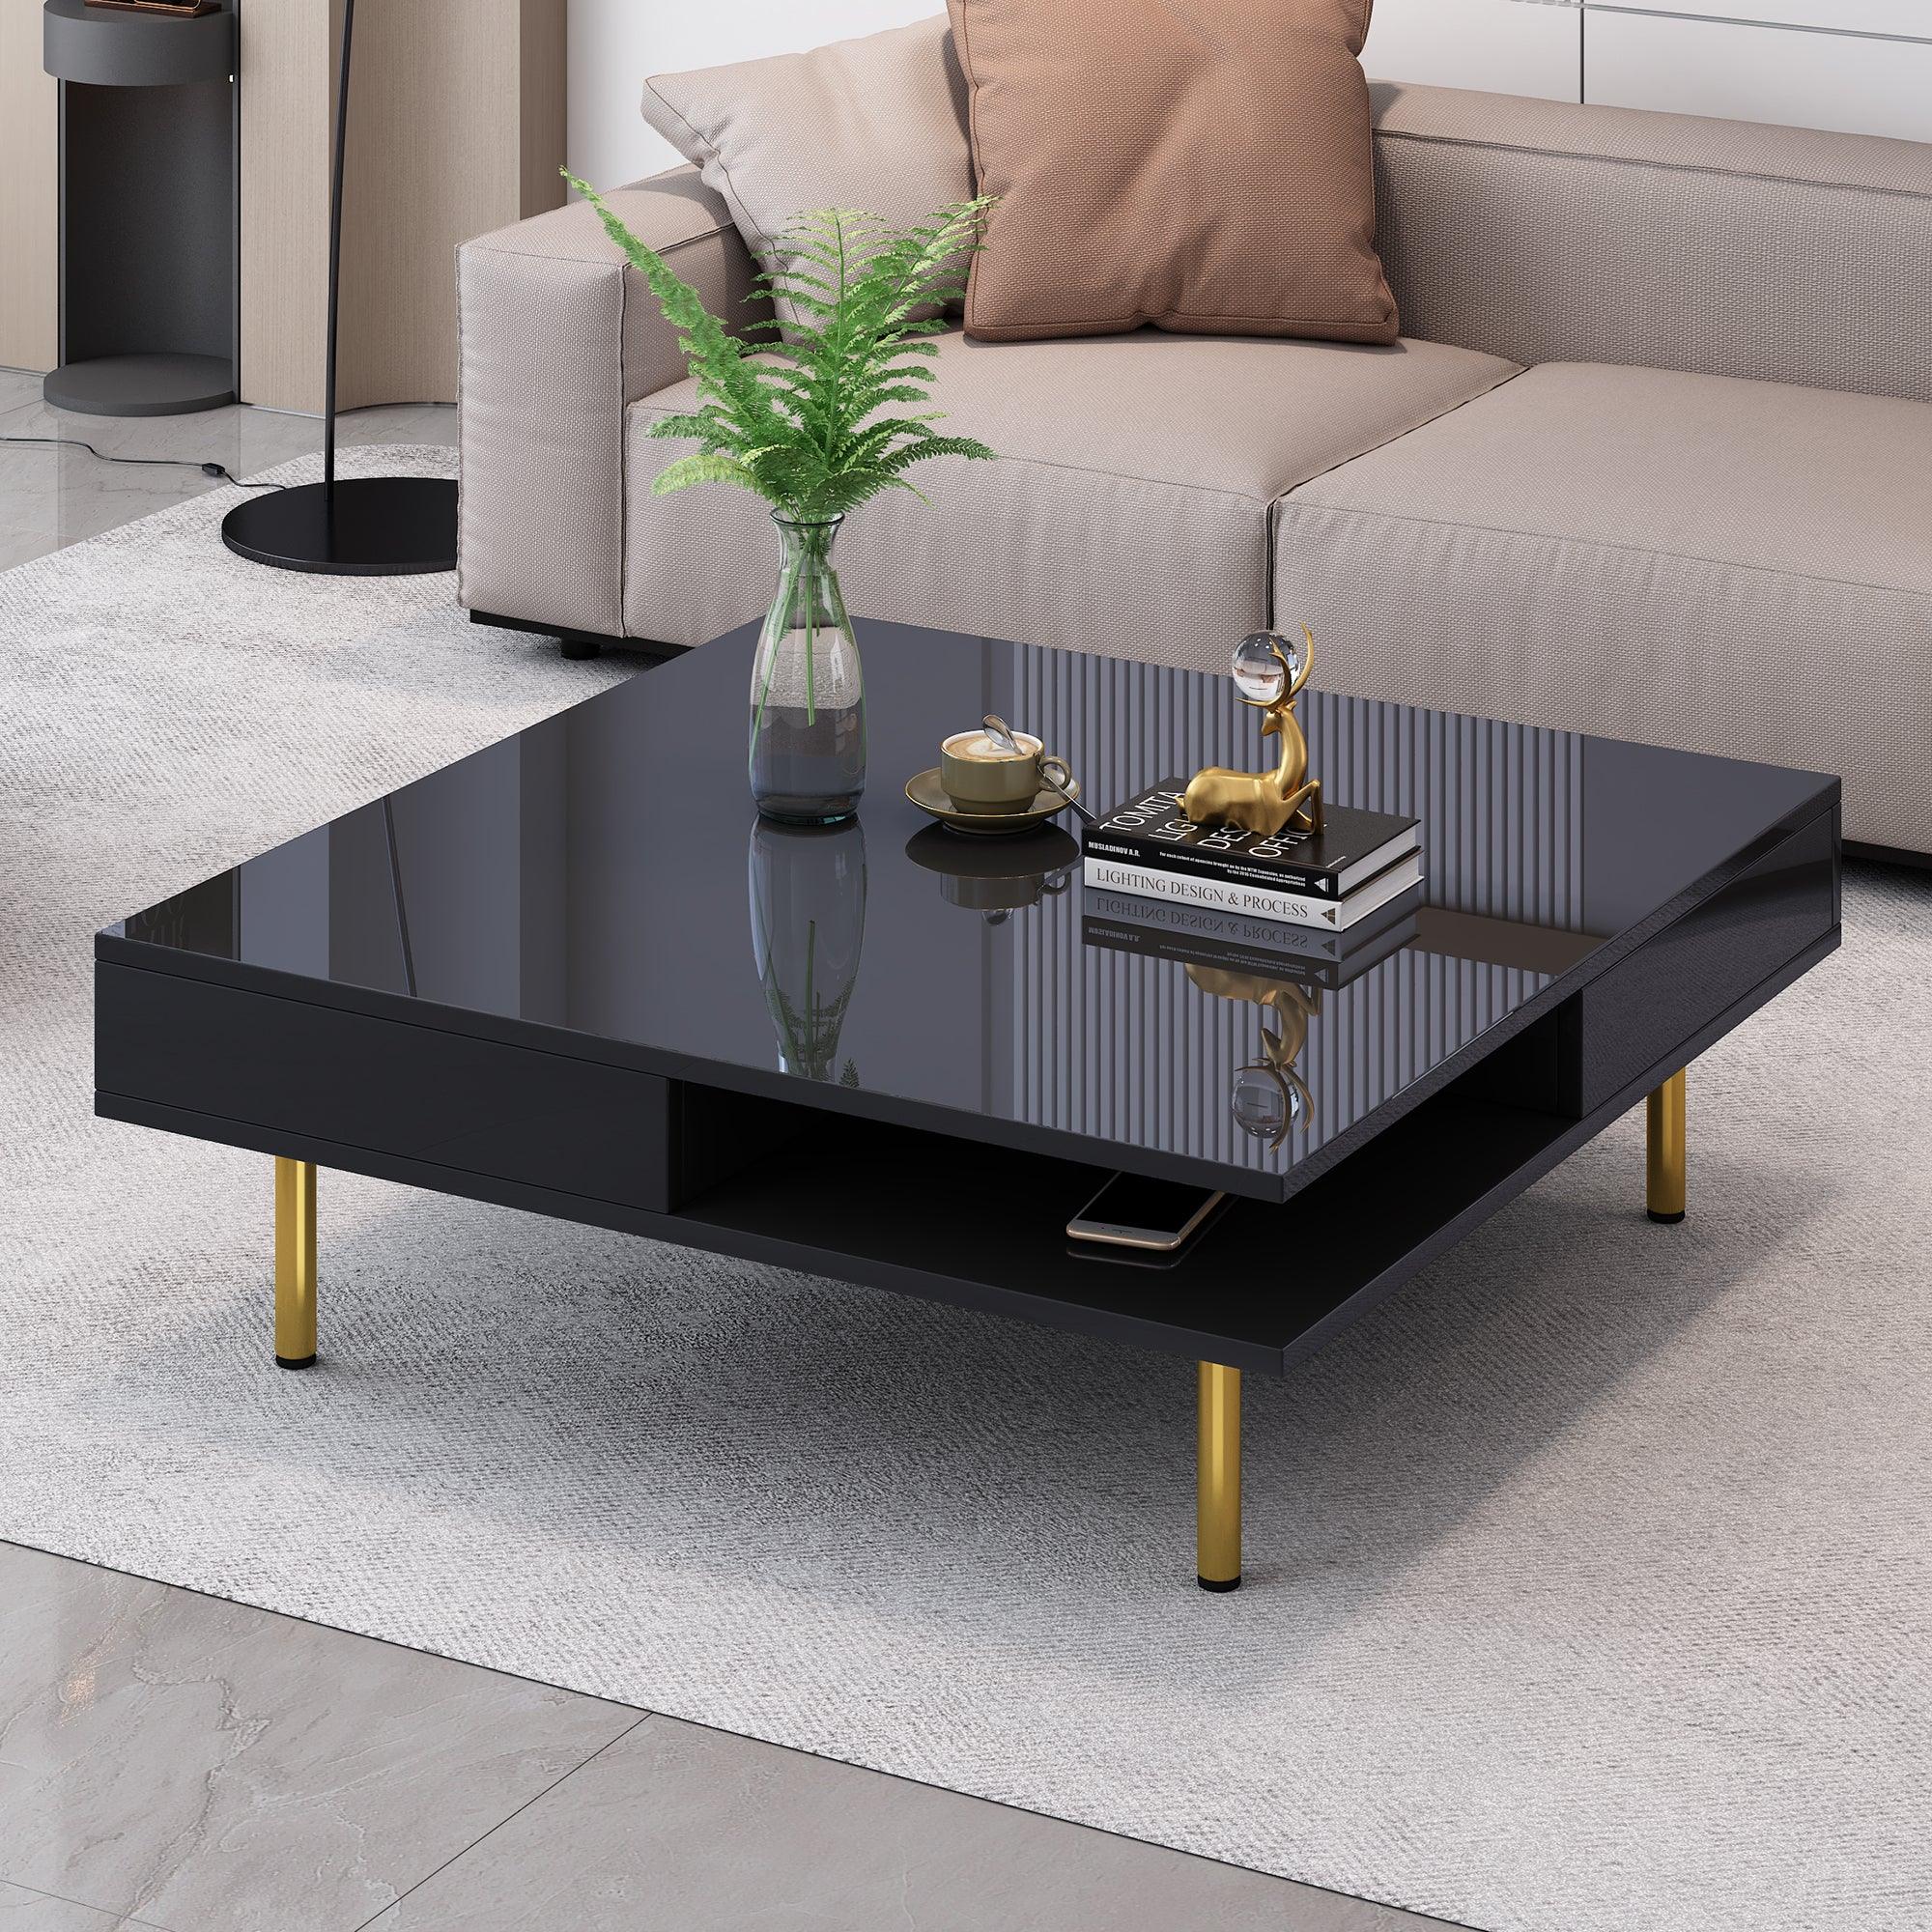 🆓🚛 Exquisite High Gloss Coffee Table With 4 Golden Legs & 2 Small Drawers, 2-Tier Square Center Table for Living Room, Black